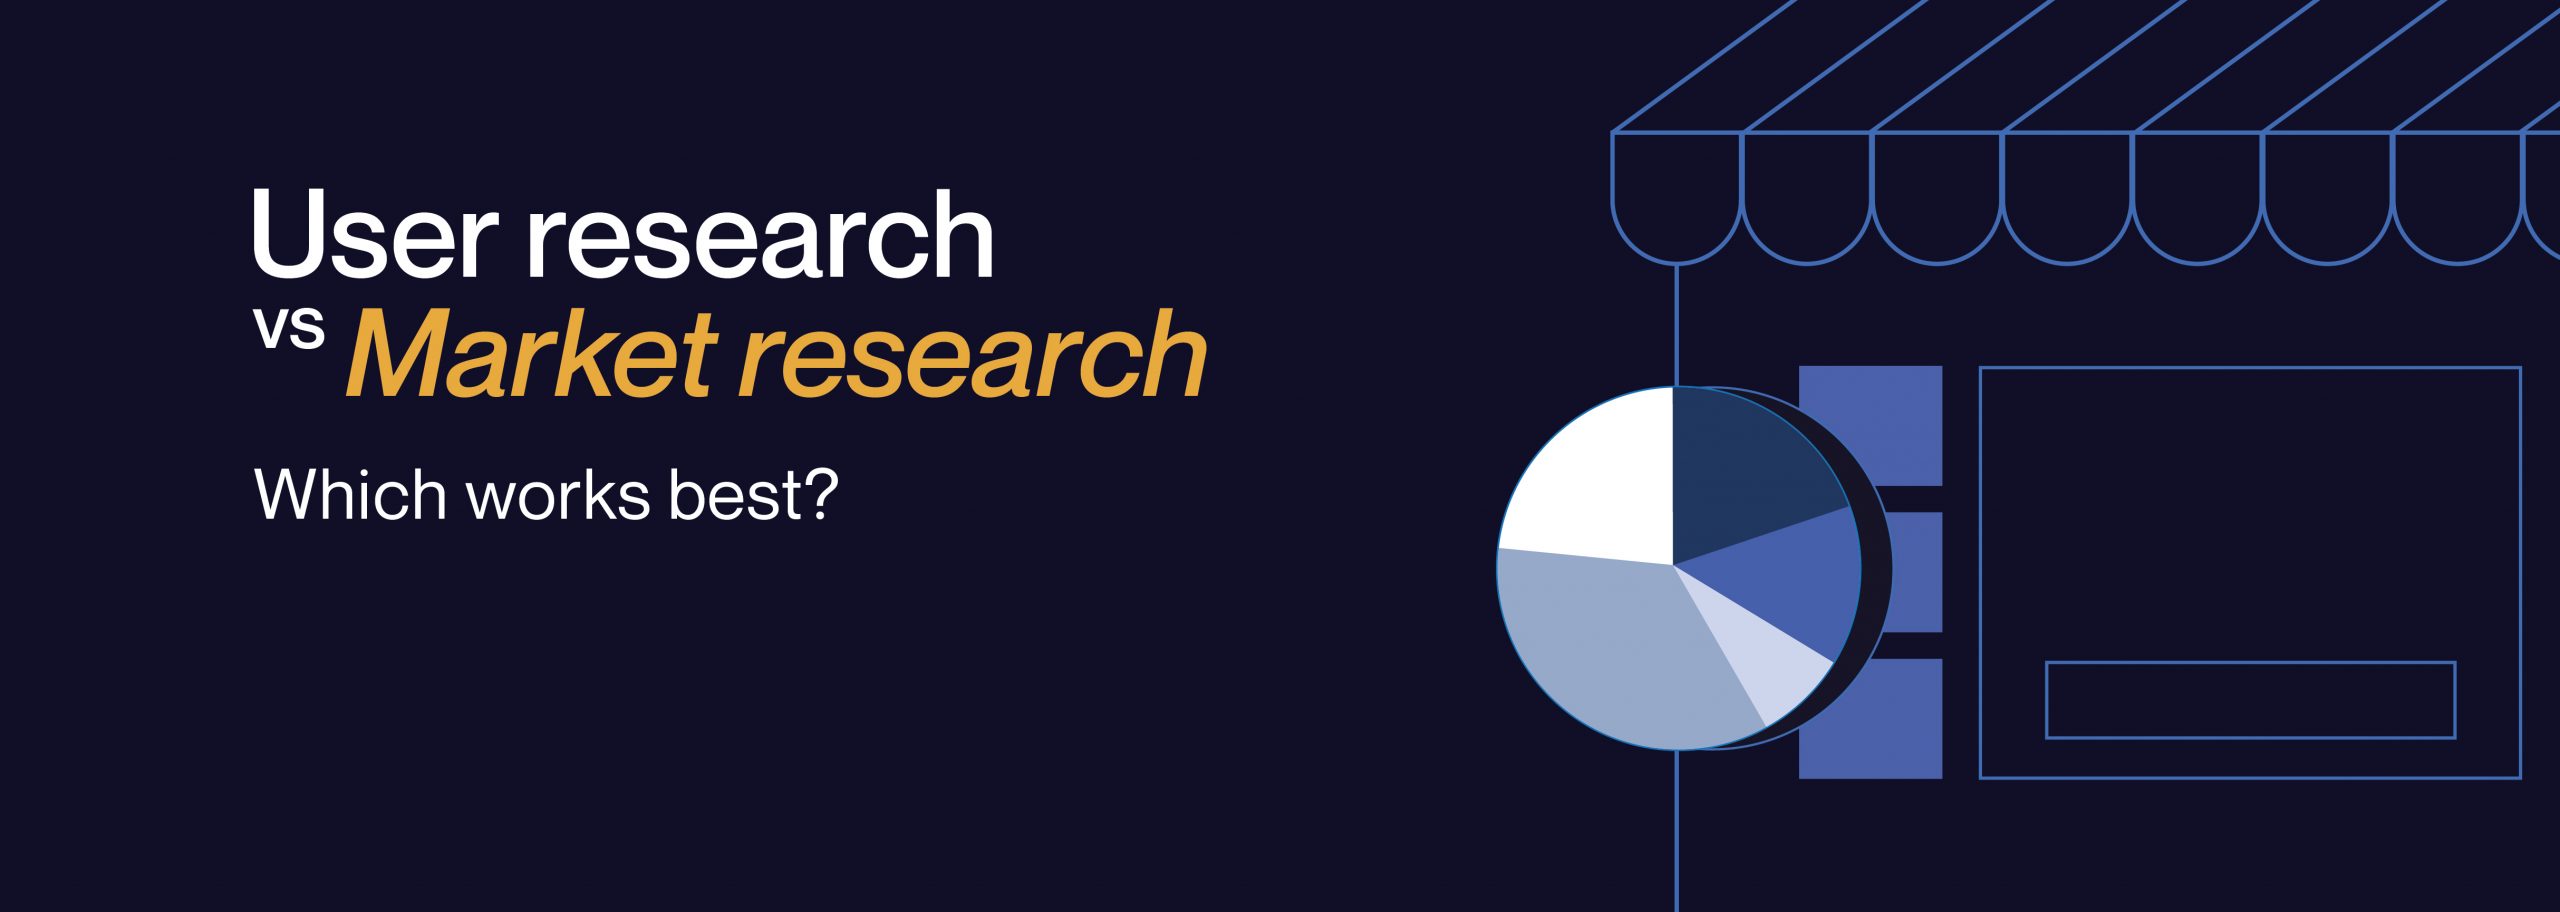 User research VS Market research, which works best for You?  